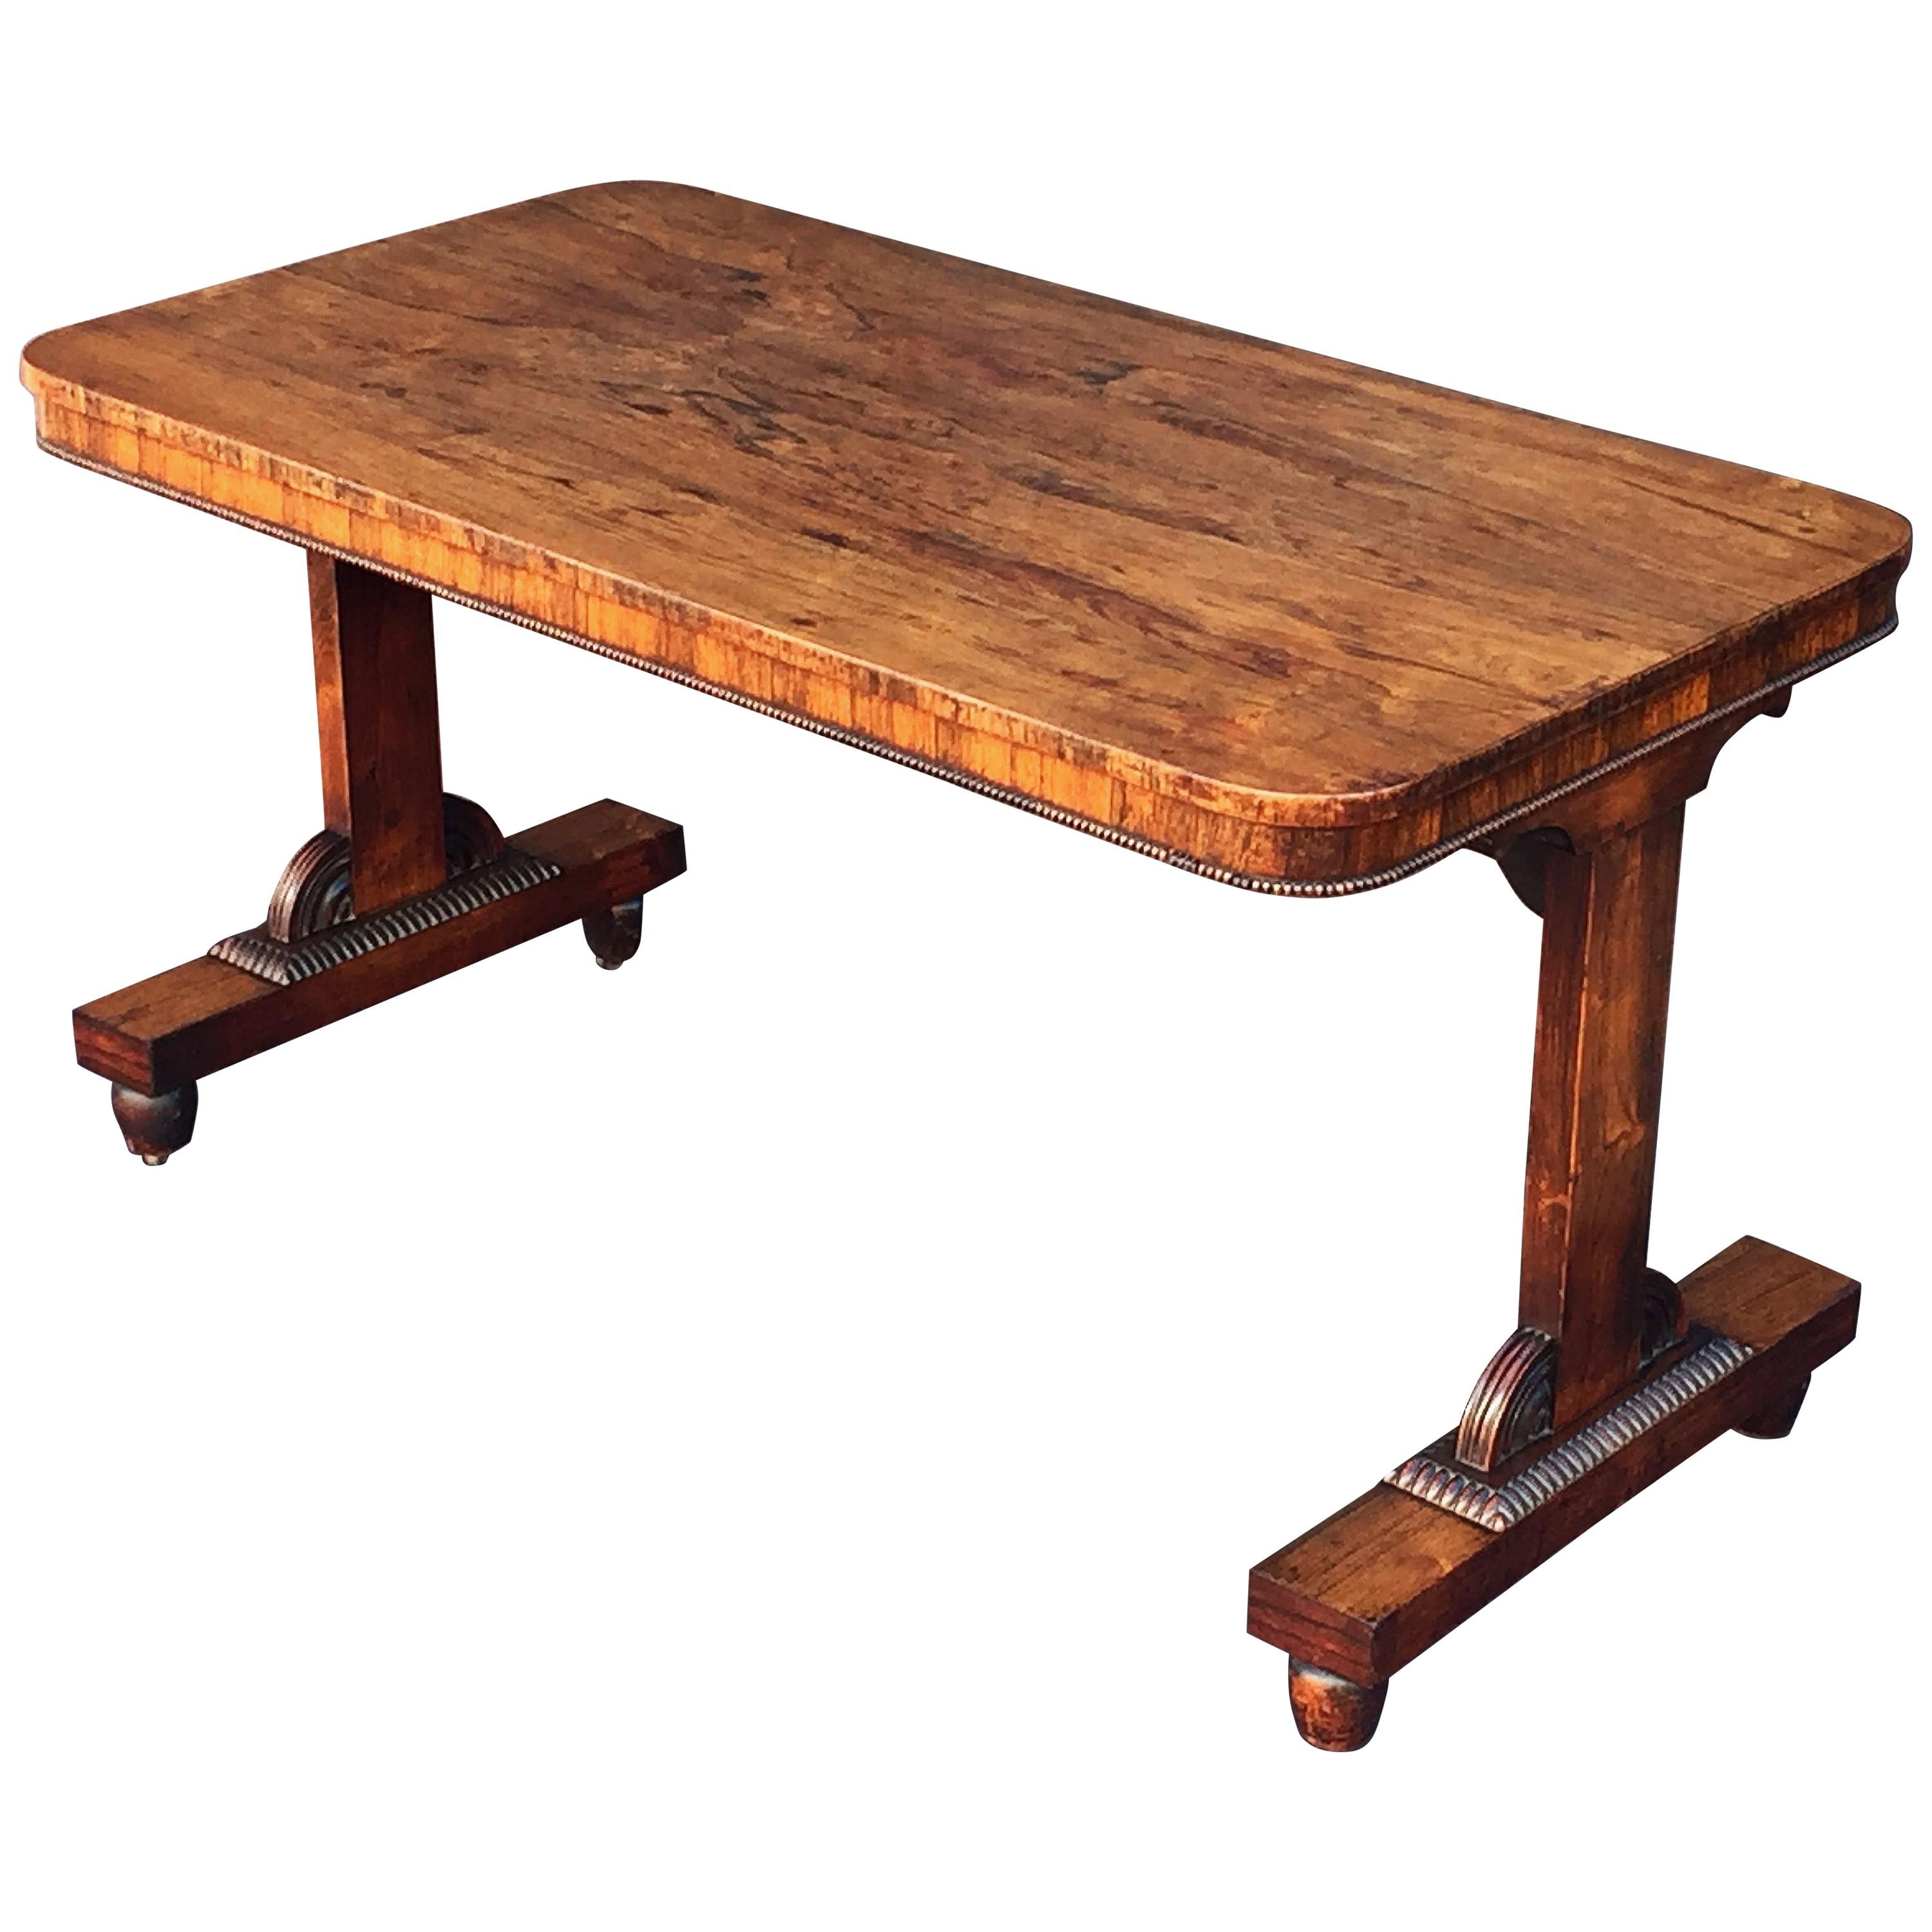 English Library Table of Rosewood from the Regency Era